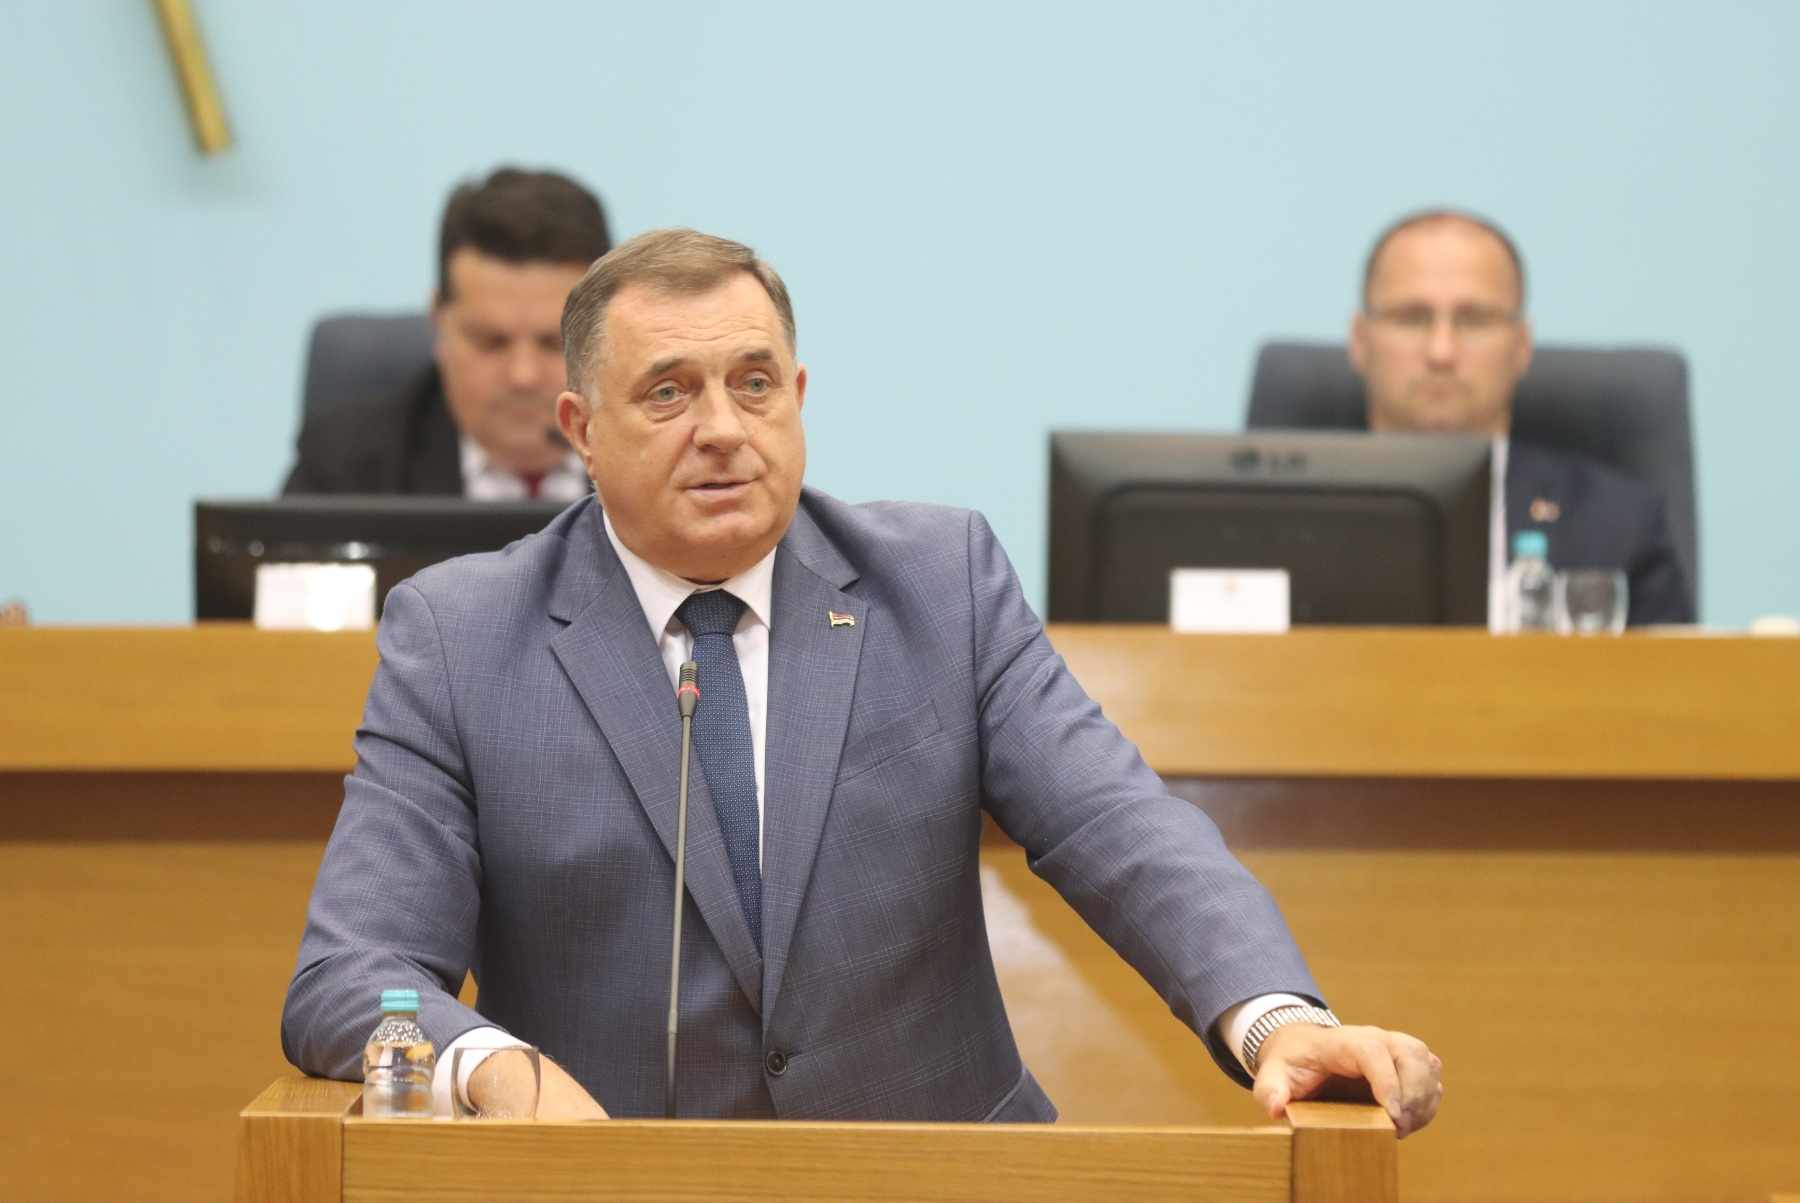 Milorad Dodik speaking before the National Assembly in Banja Luka